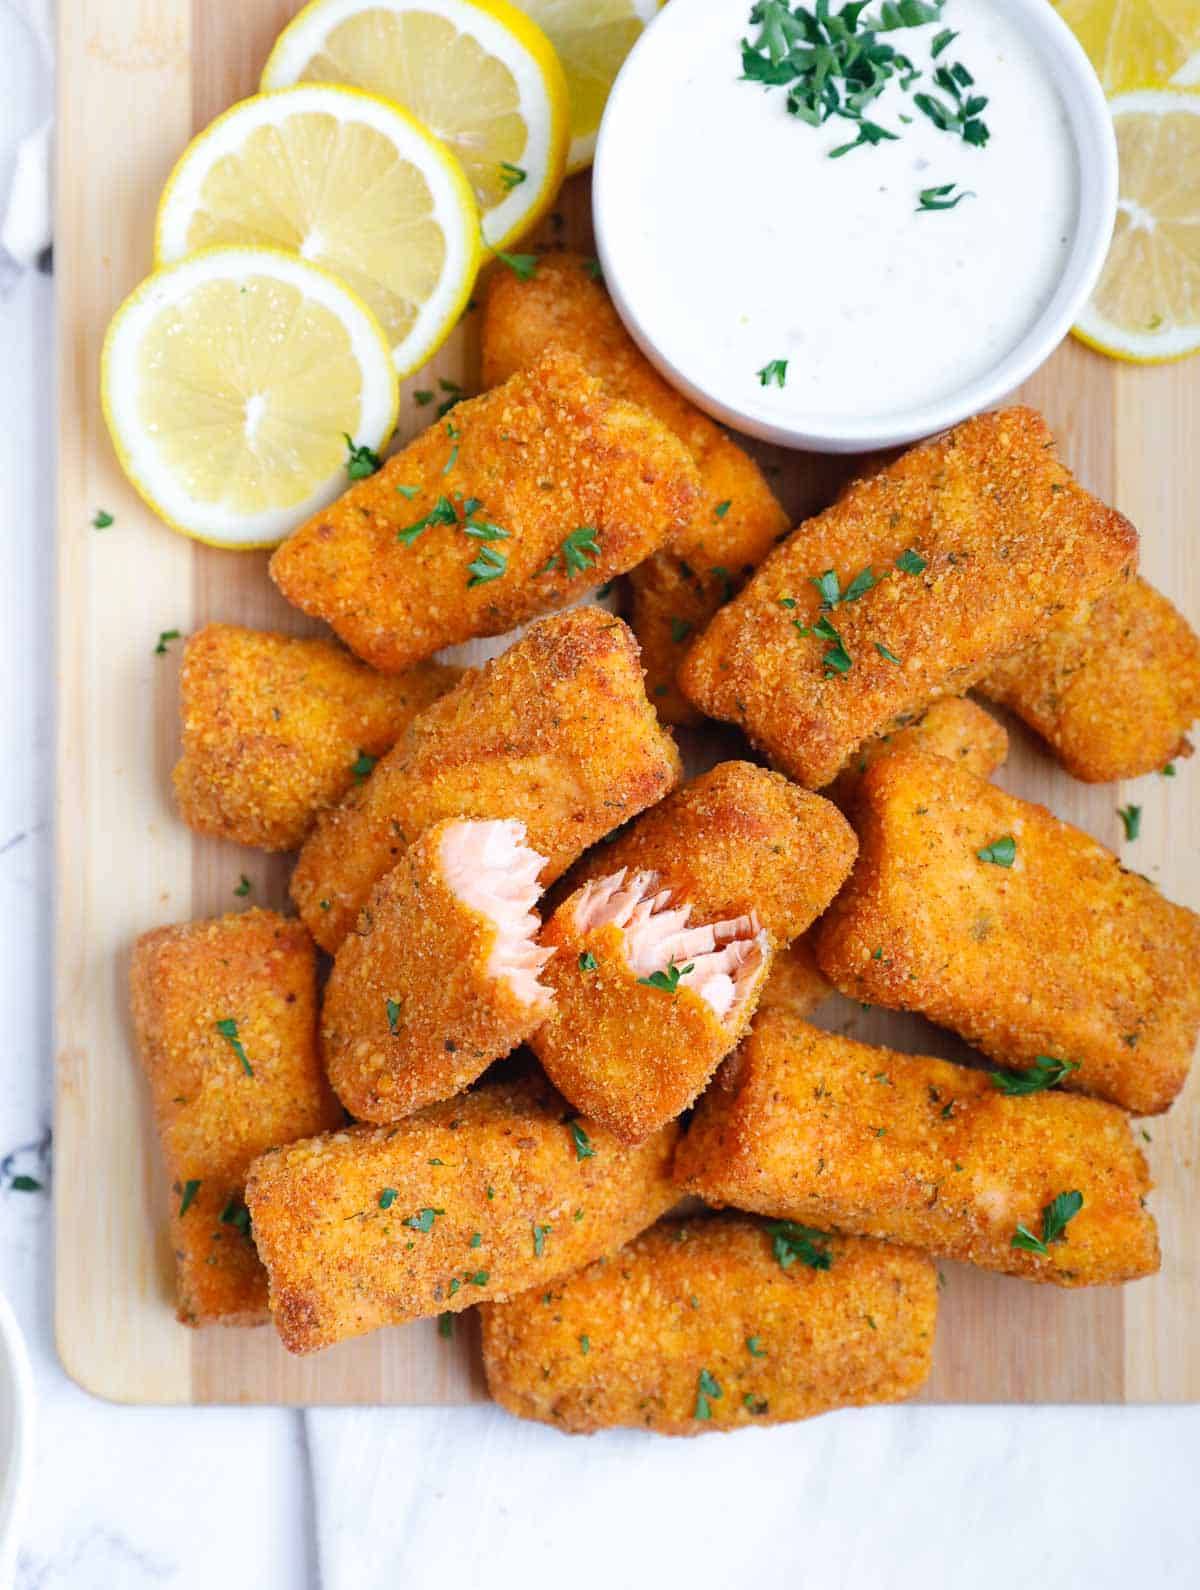 Crispy baked salmon fish fingers with dipping sauce and lemons.